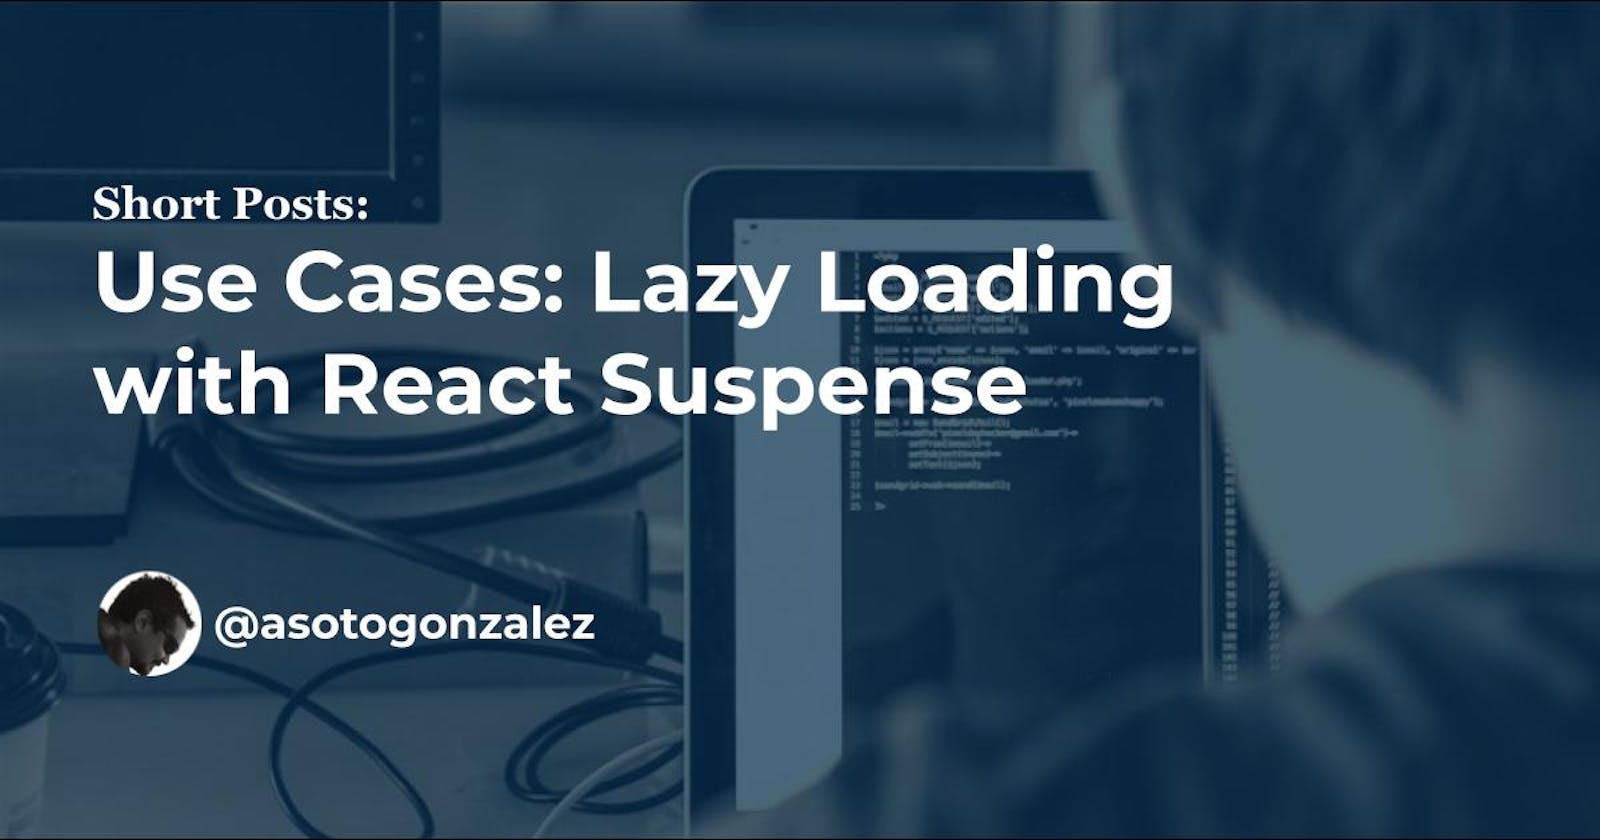 Use Cases: Lazy Loading with React Suspense